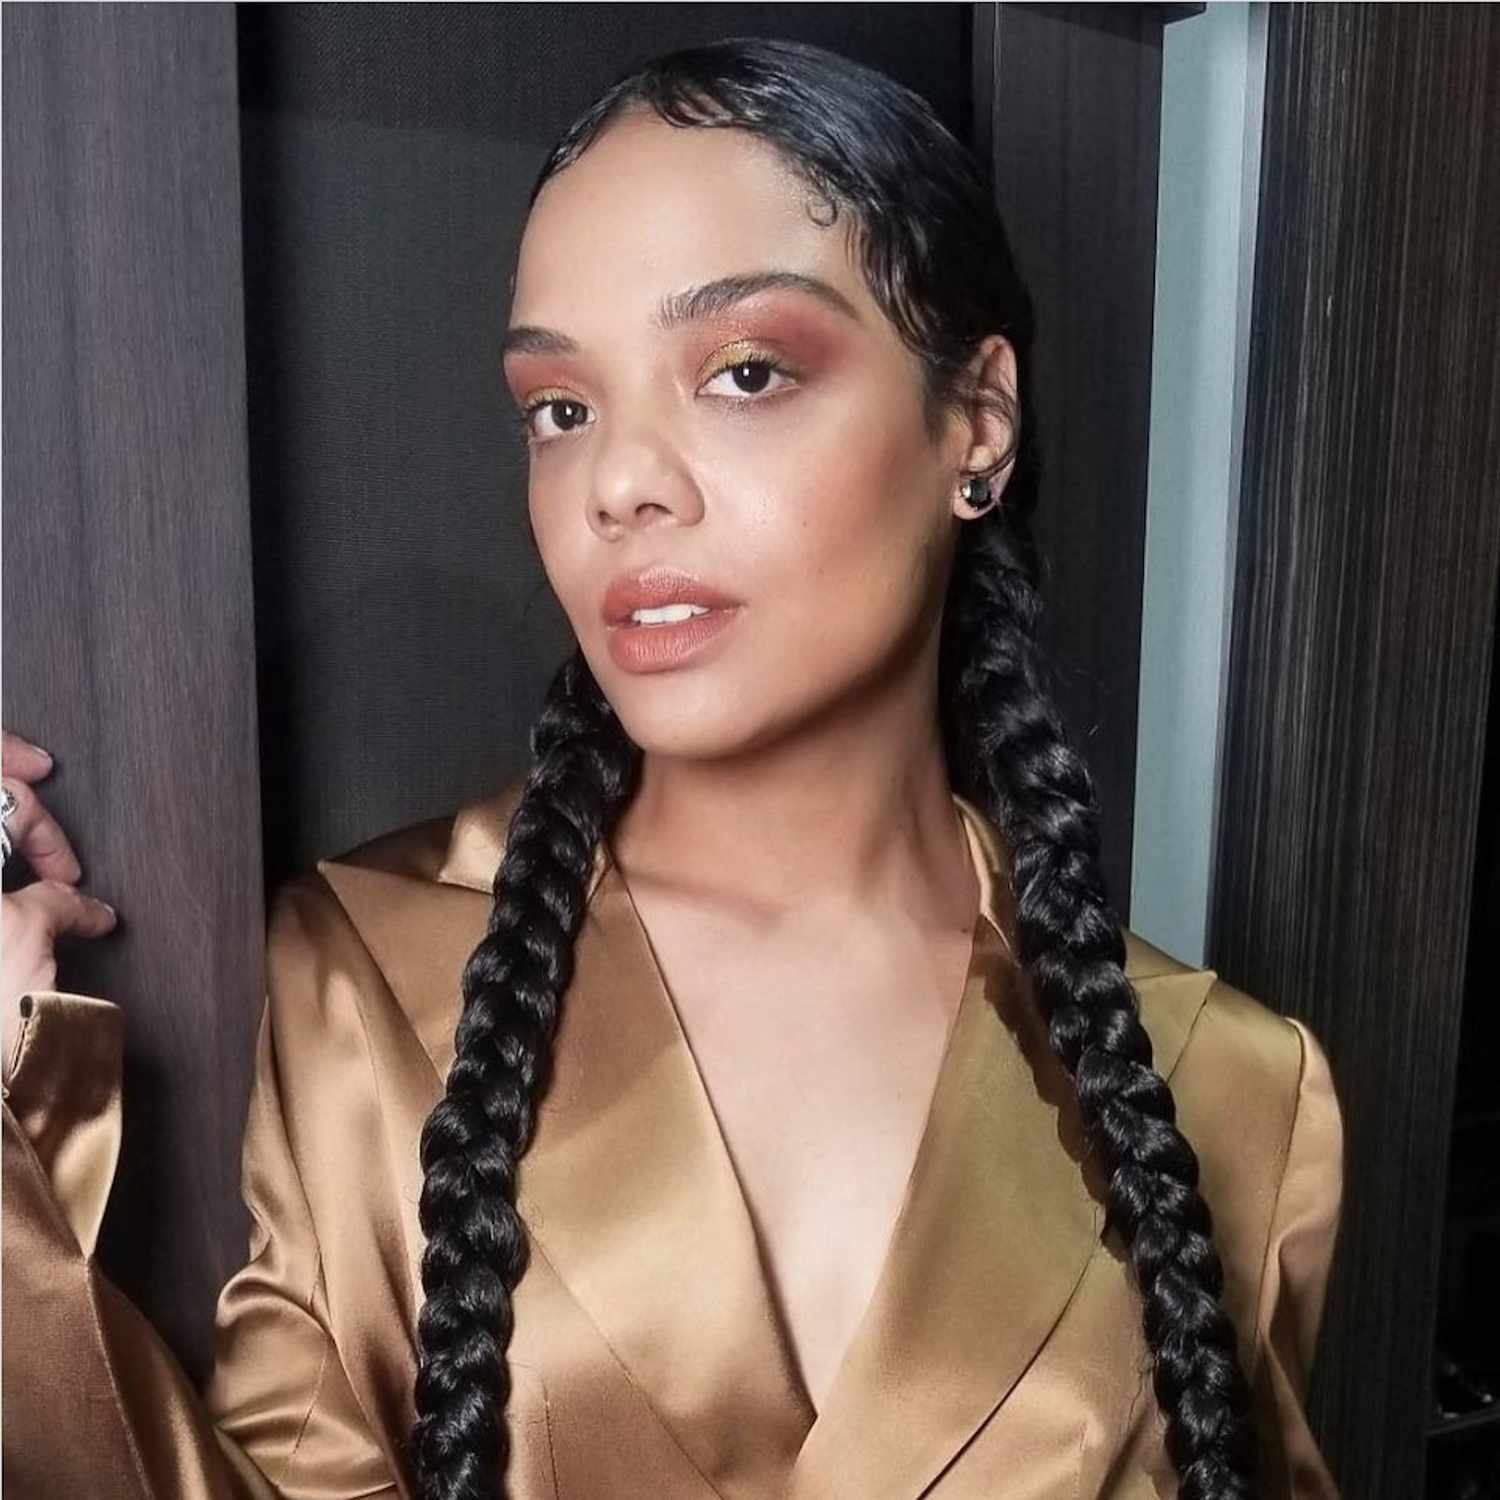 Tessa Thompson wears braided pigtails, a warm-toned makeup look, and a gold satin blazer